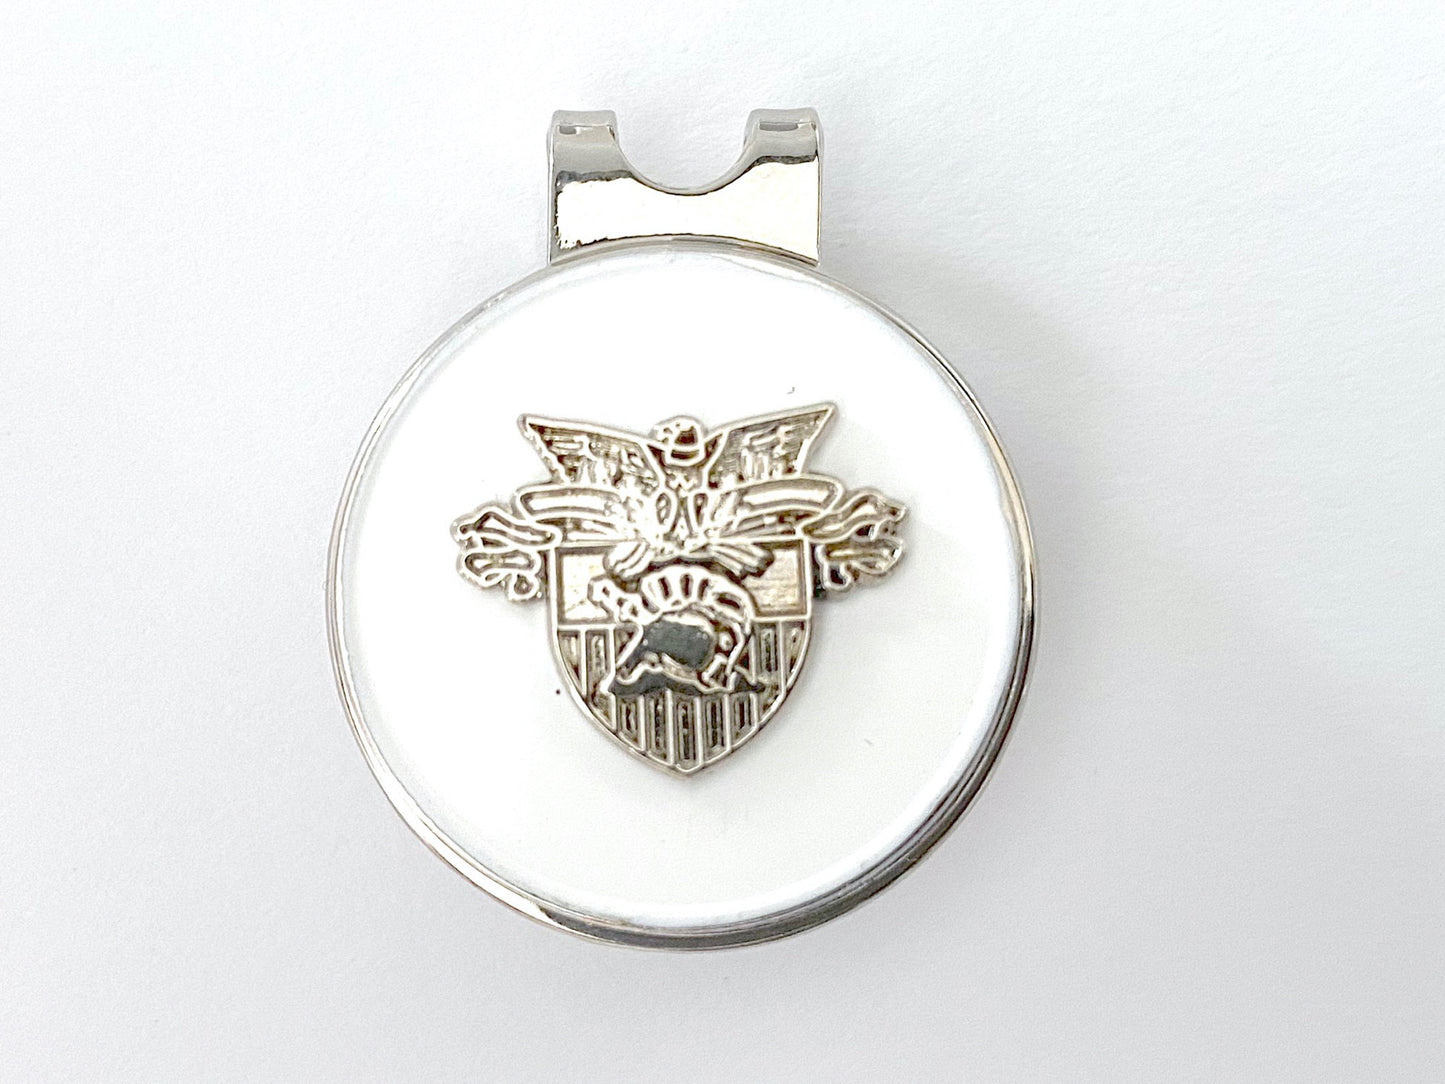 USMA Small Silver Crest Golf Hat Clip and Ball Marker